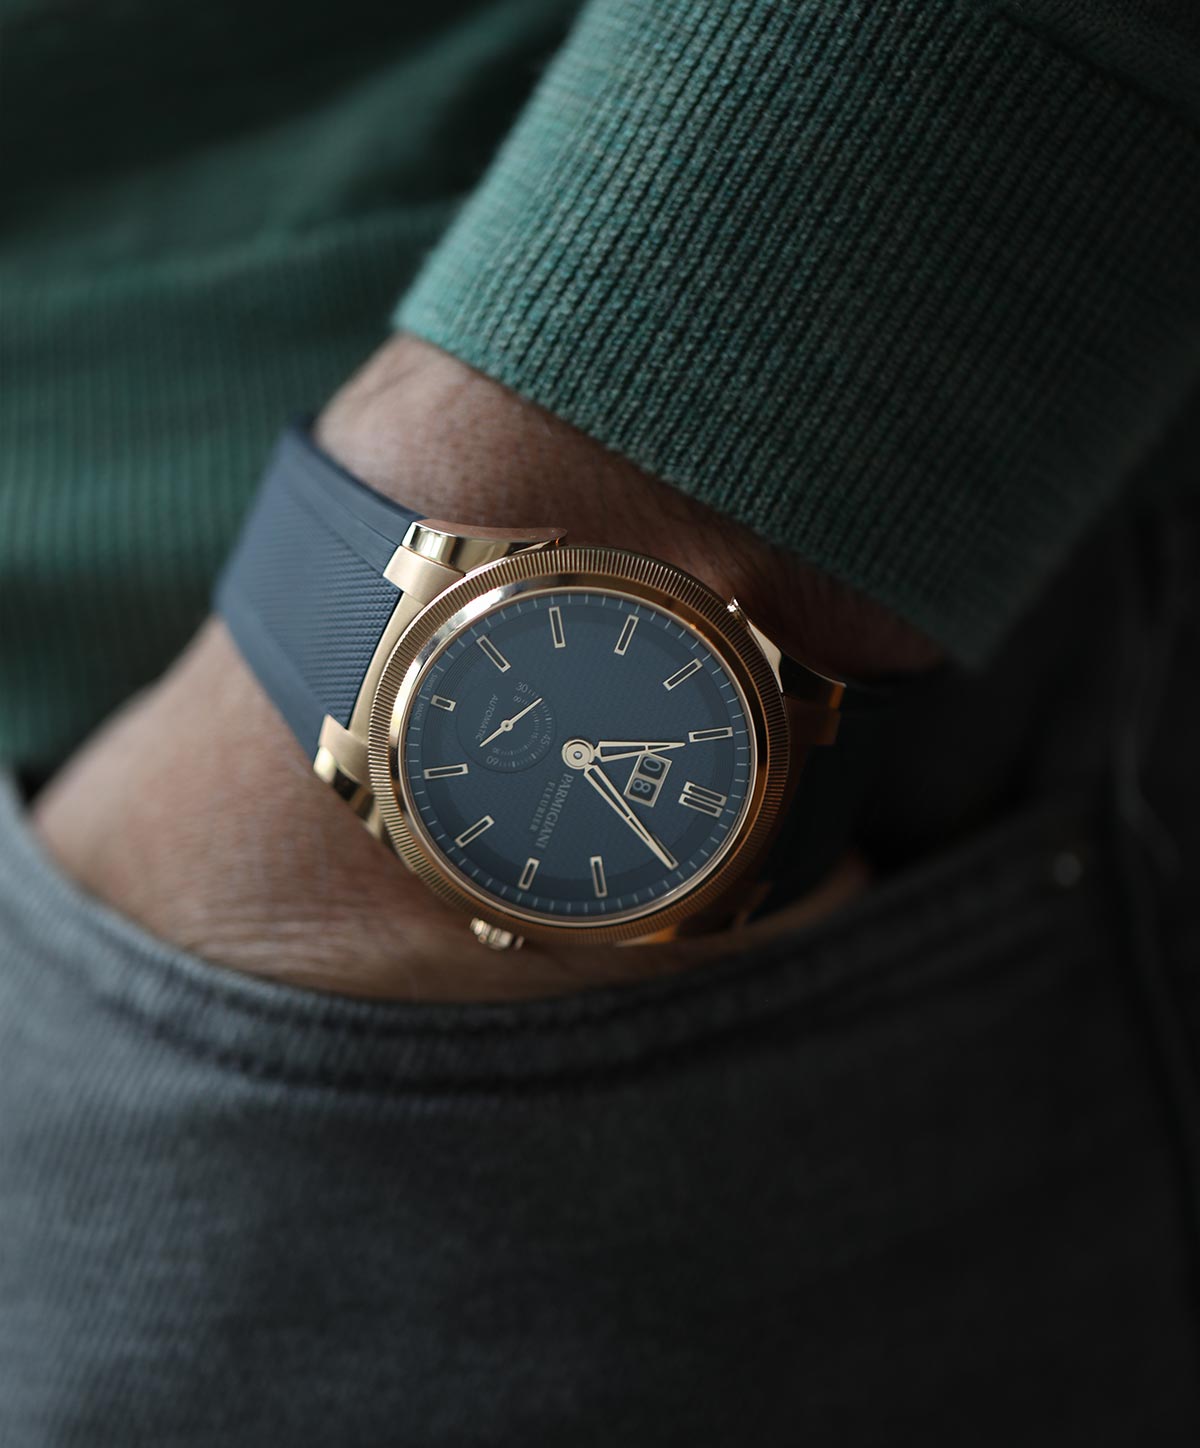 Parmigiani Fleurier - Tonda GT | Time and Watches | The watch blog